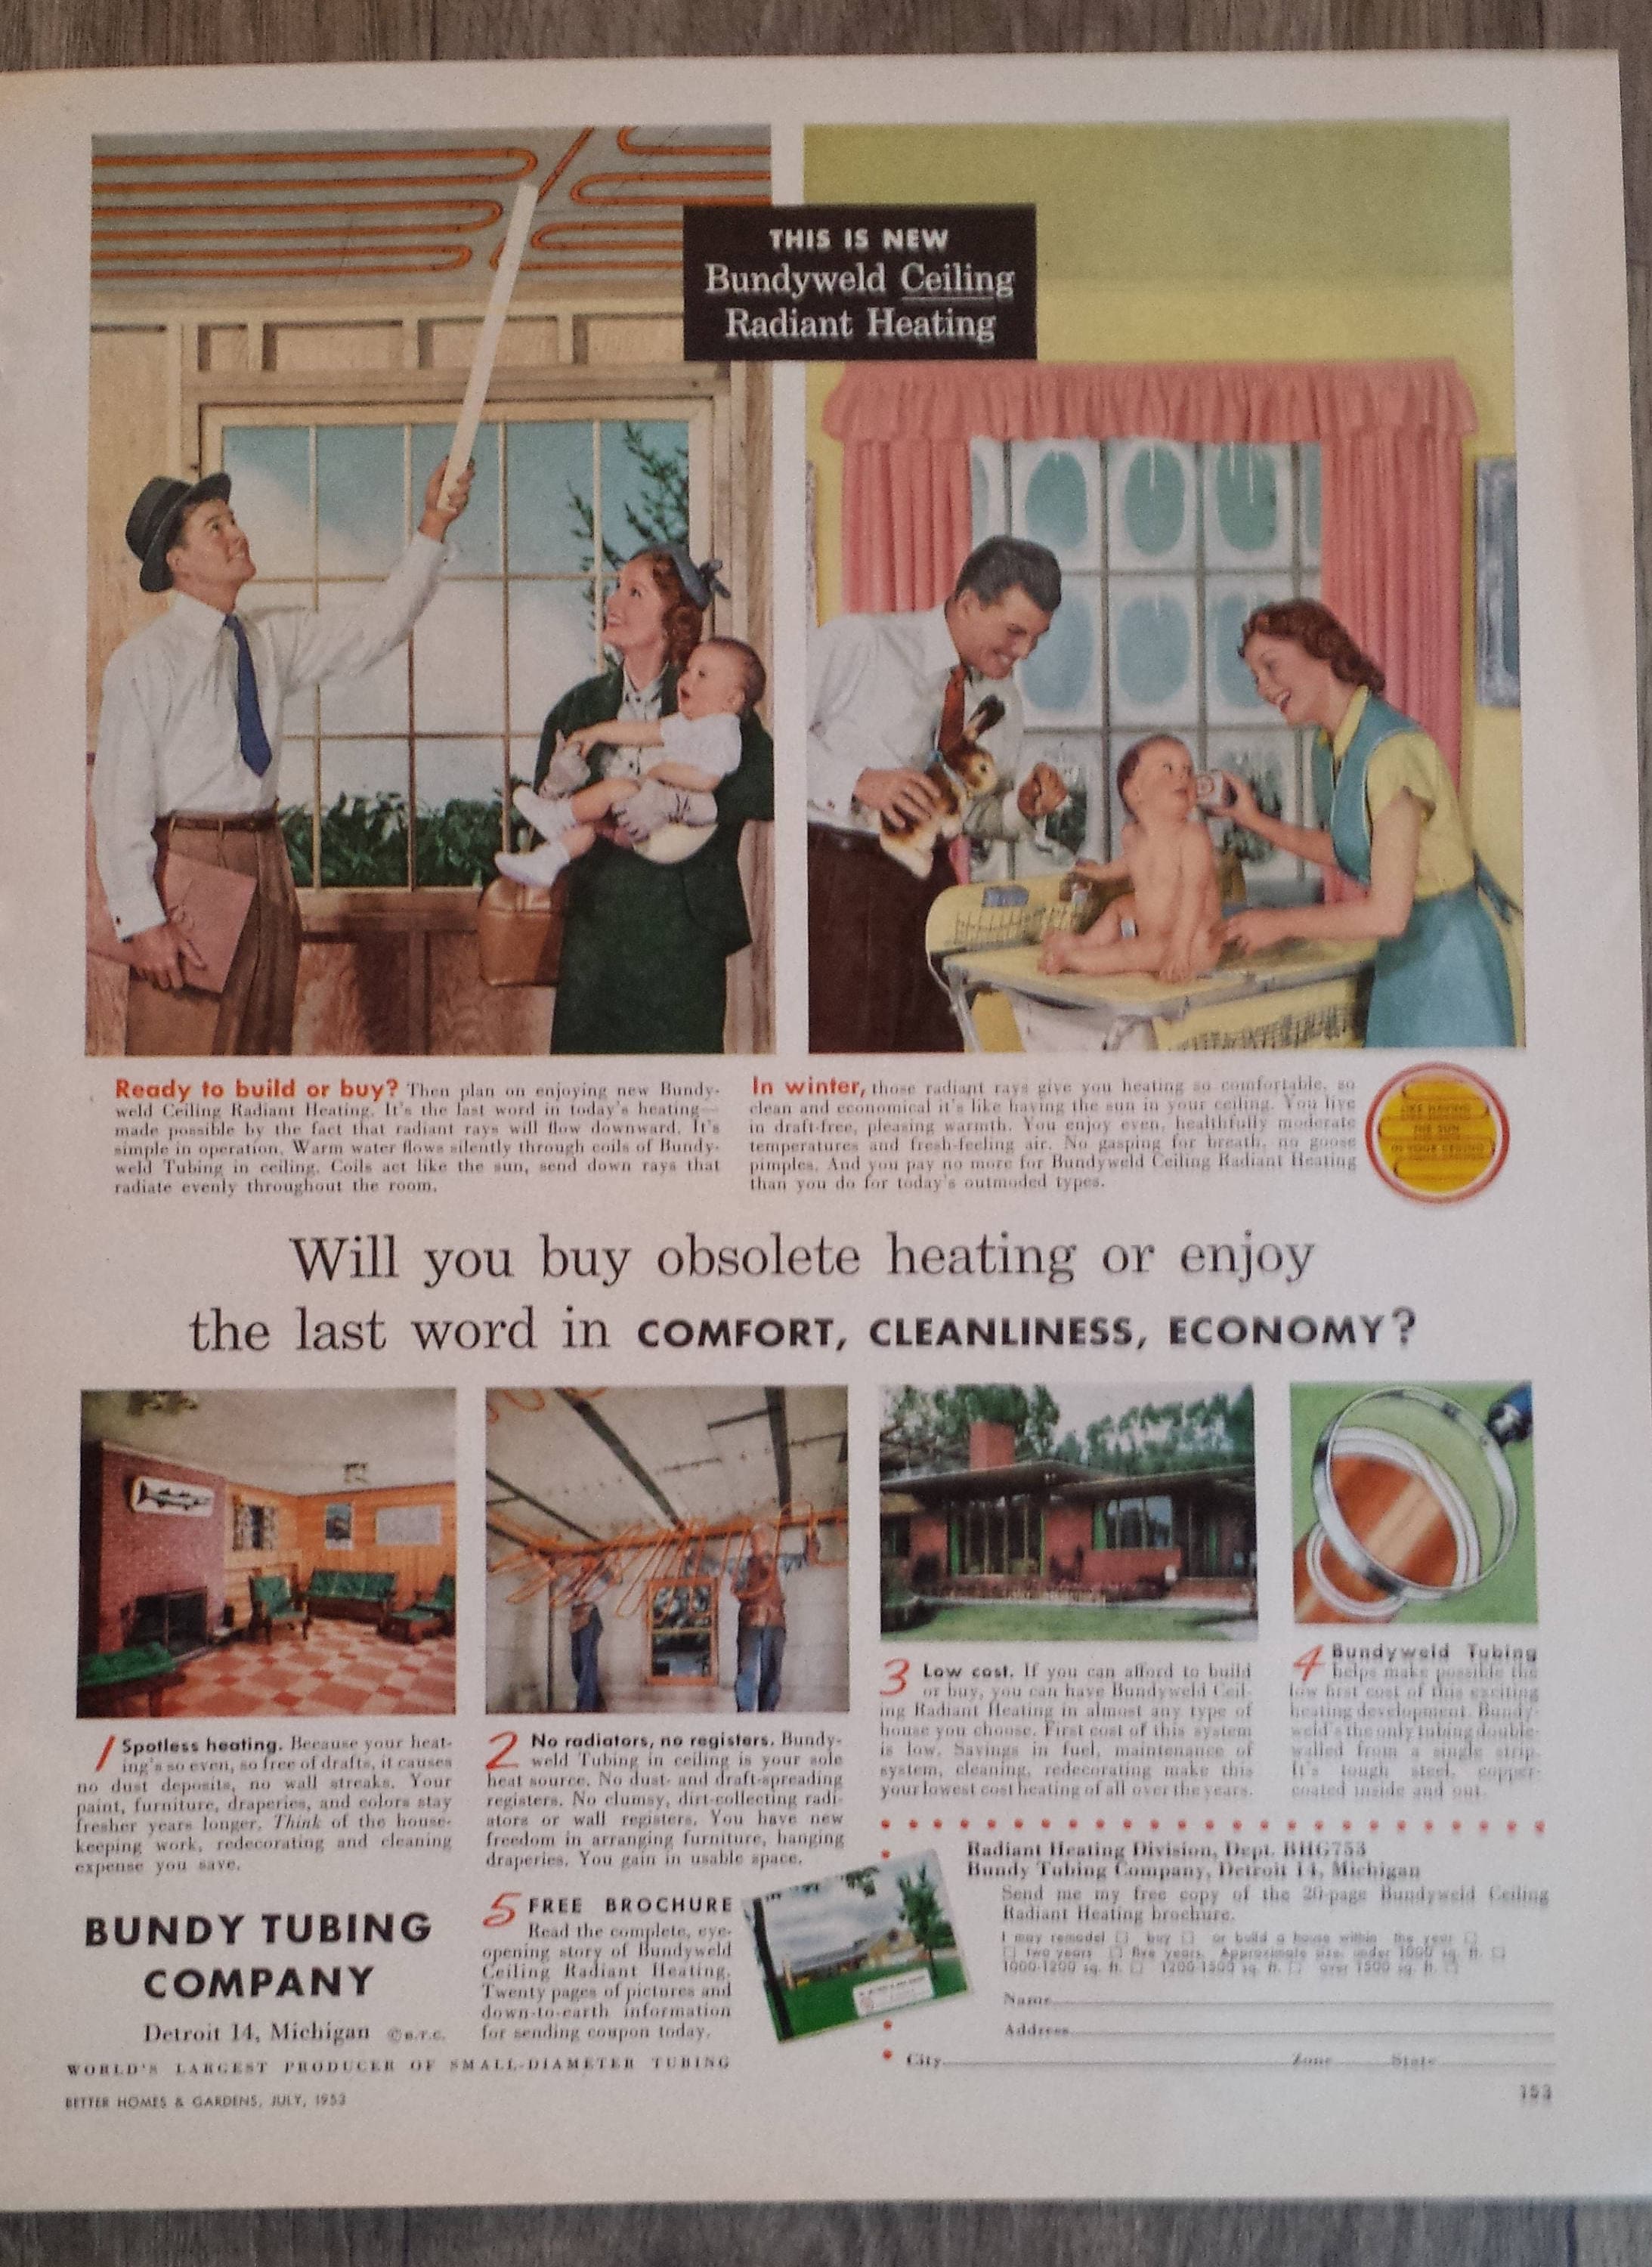 1953 JOHNSON'S Jubilee Kitchen Wax Enameled Surfaces Cleaning Household  Vintage Print Ad